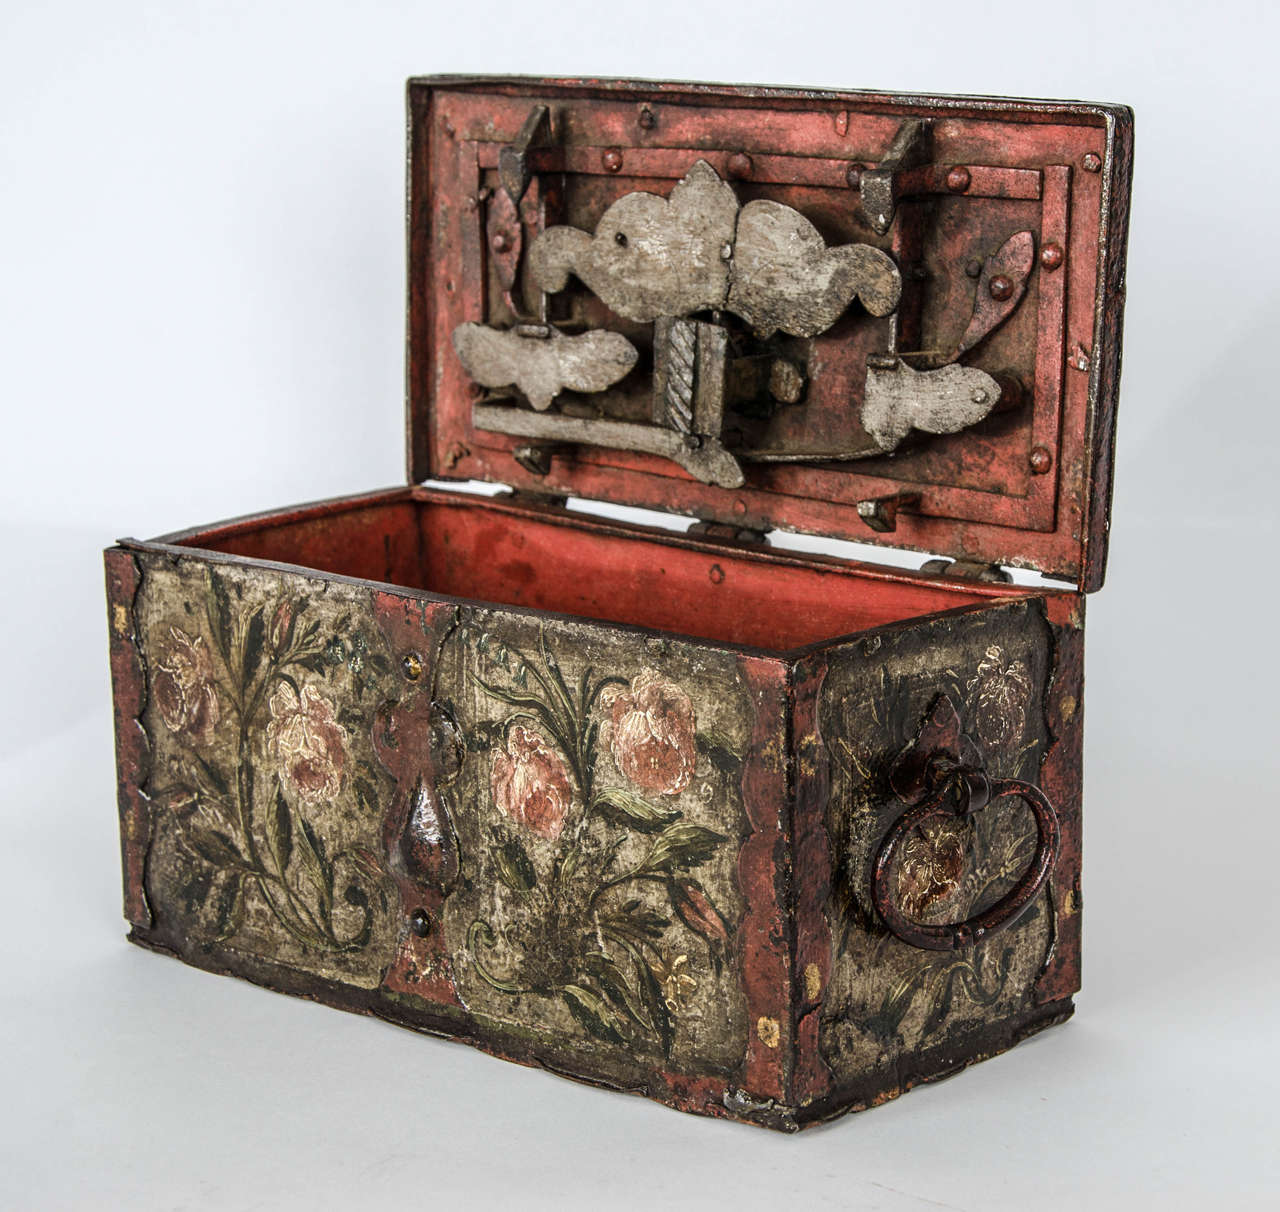 18th Century North European Small Painted Dowry Casket